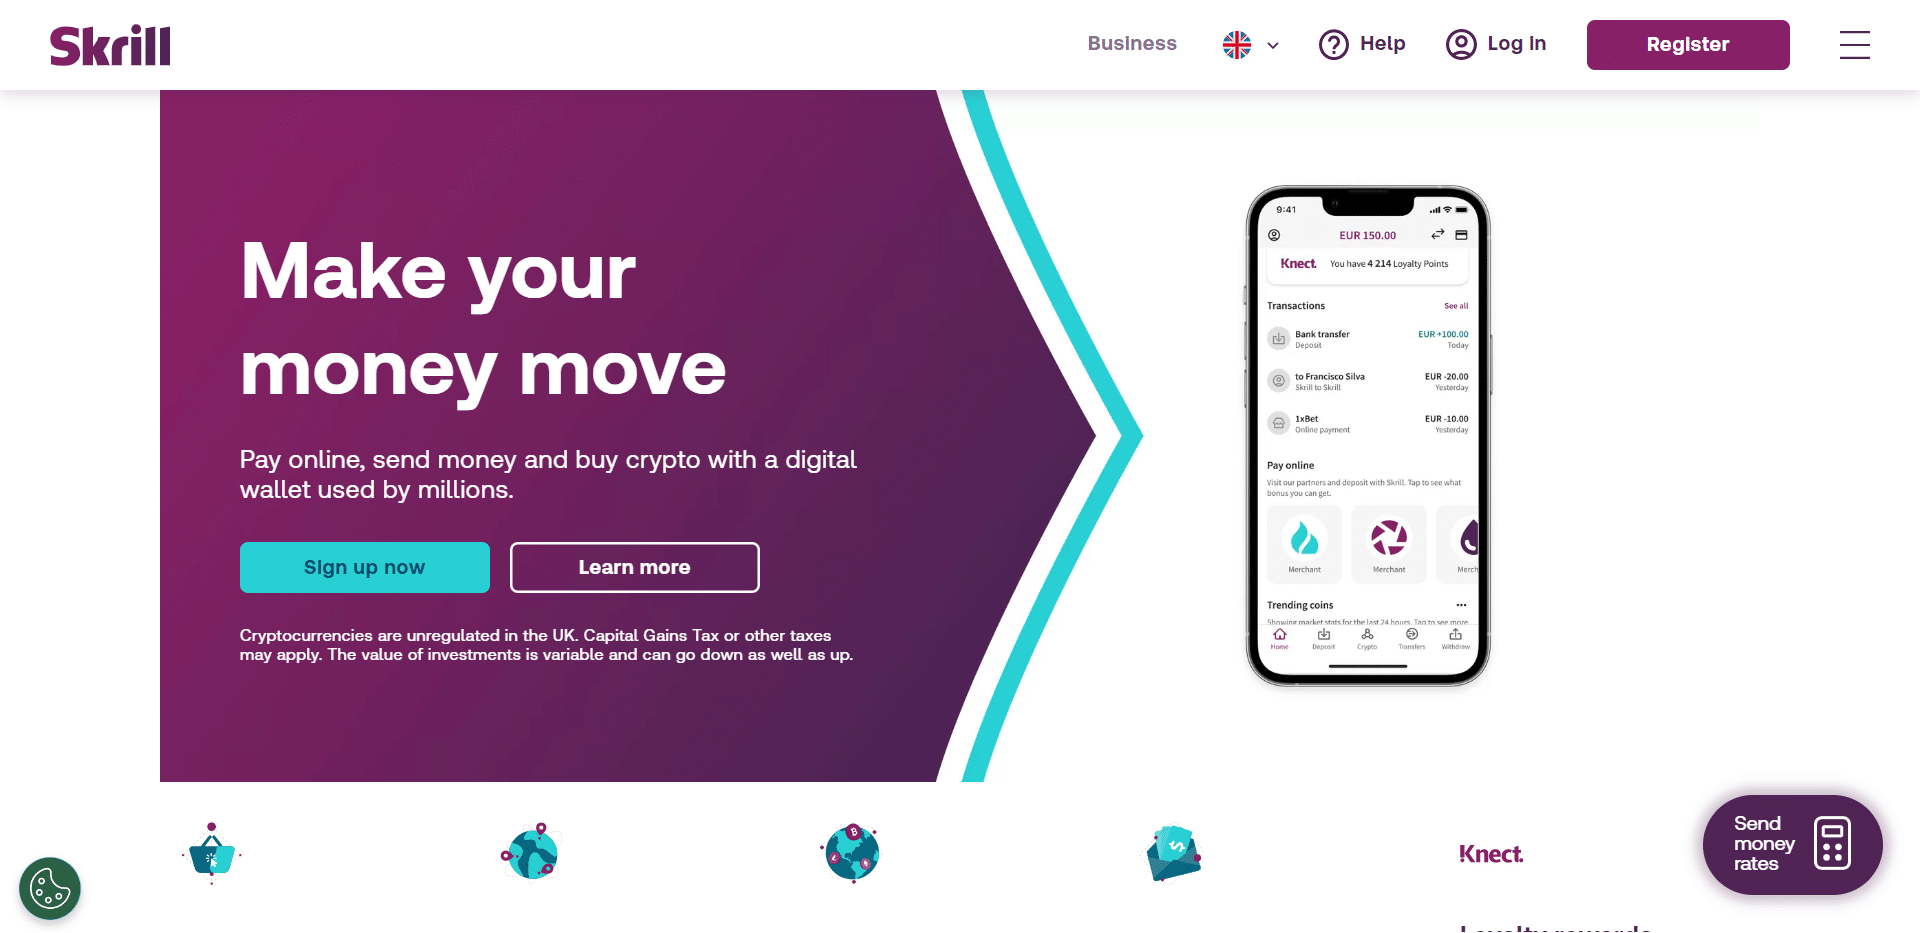 Landing page for Skrill